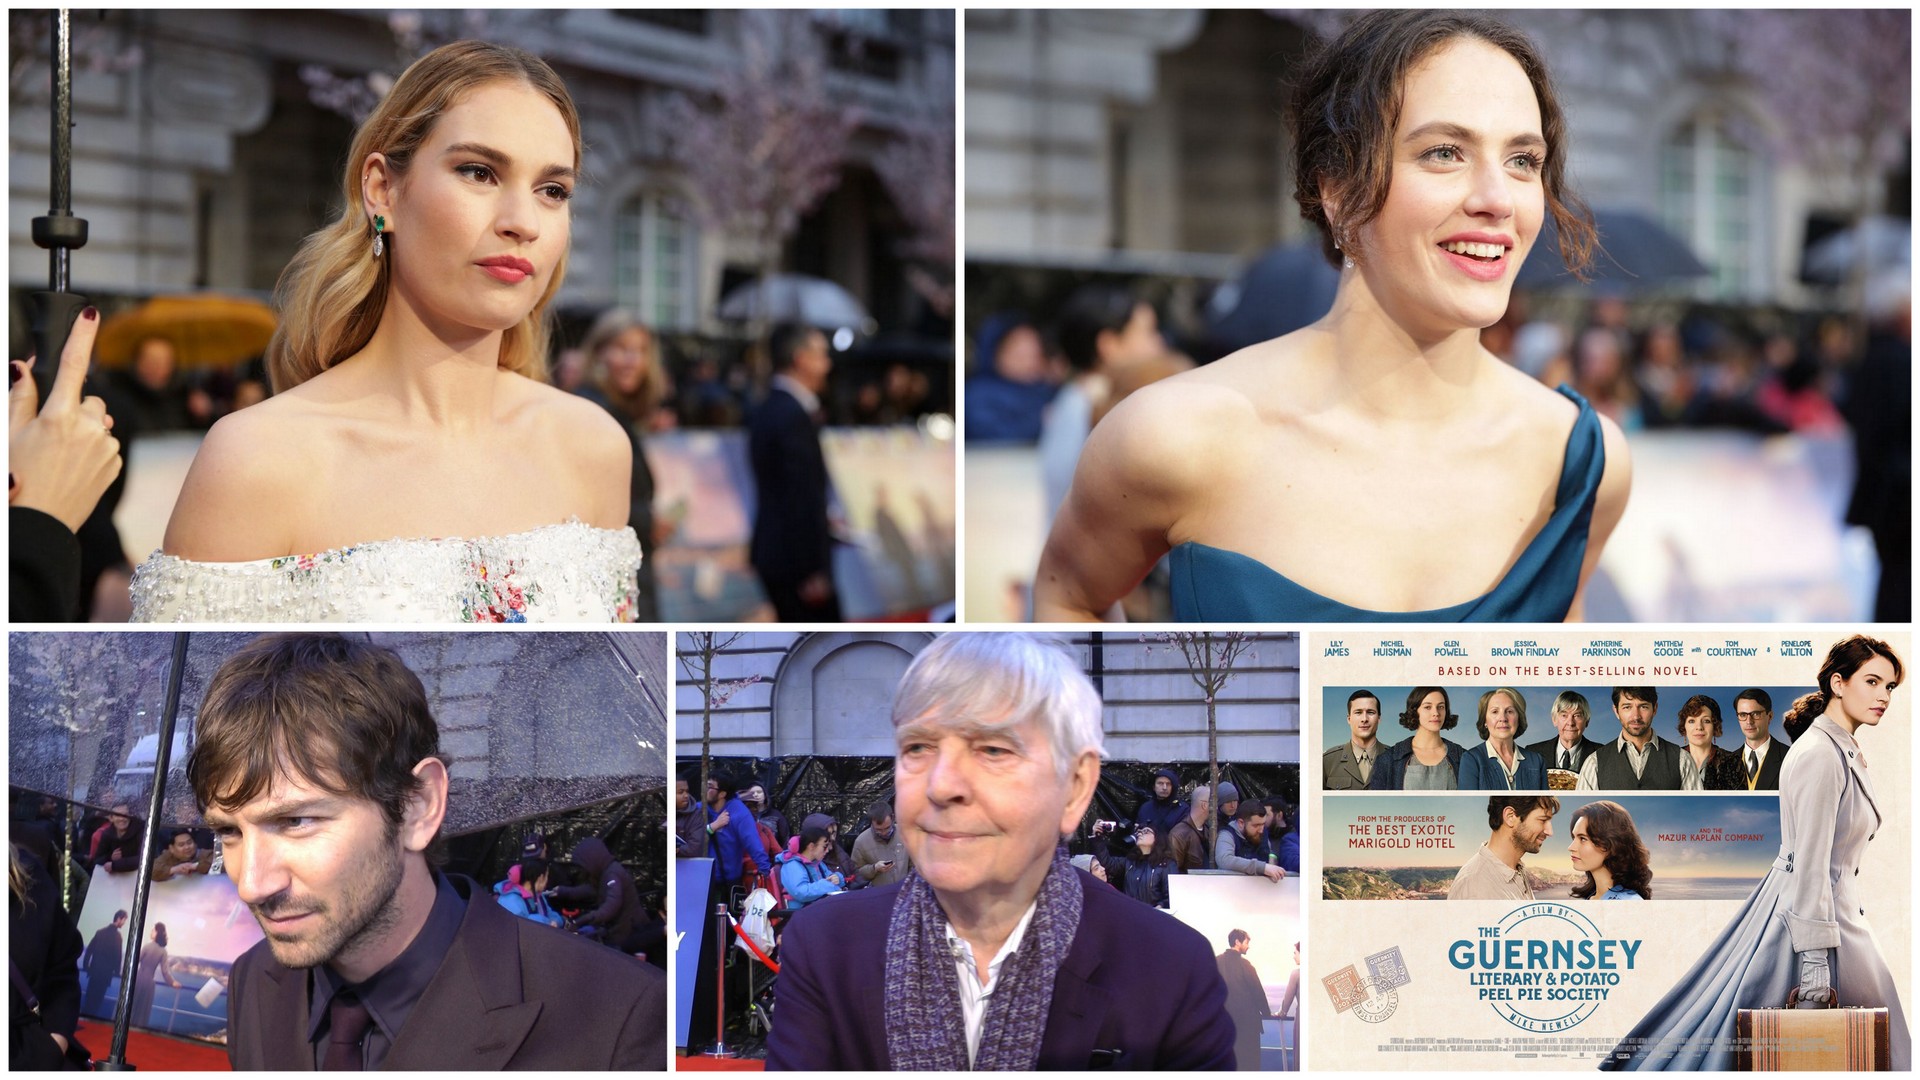 The Guernsey Literary and Potato Peel Pie Society world premiere